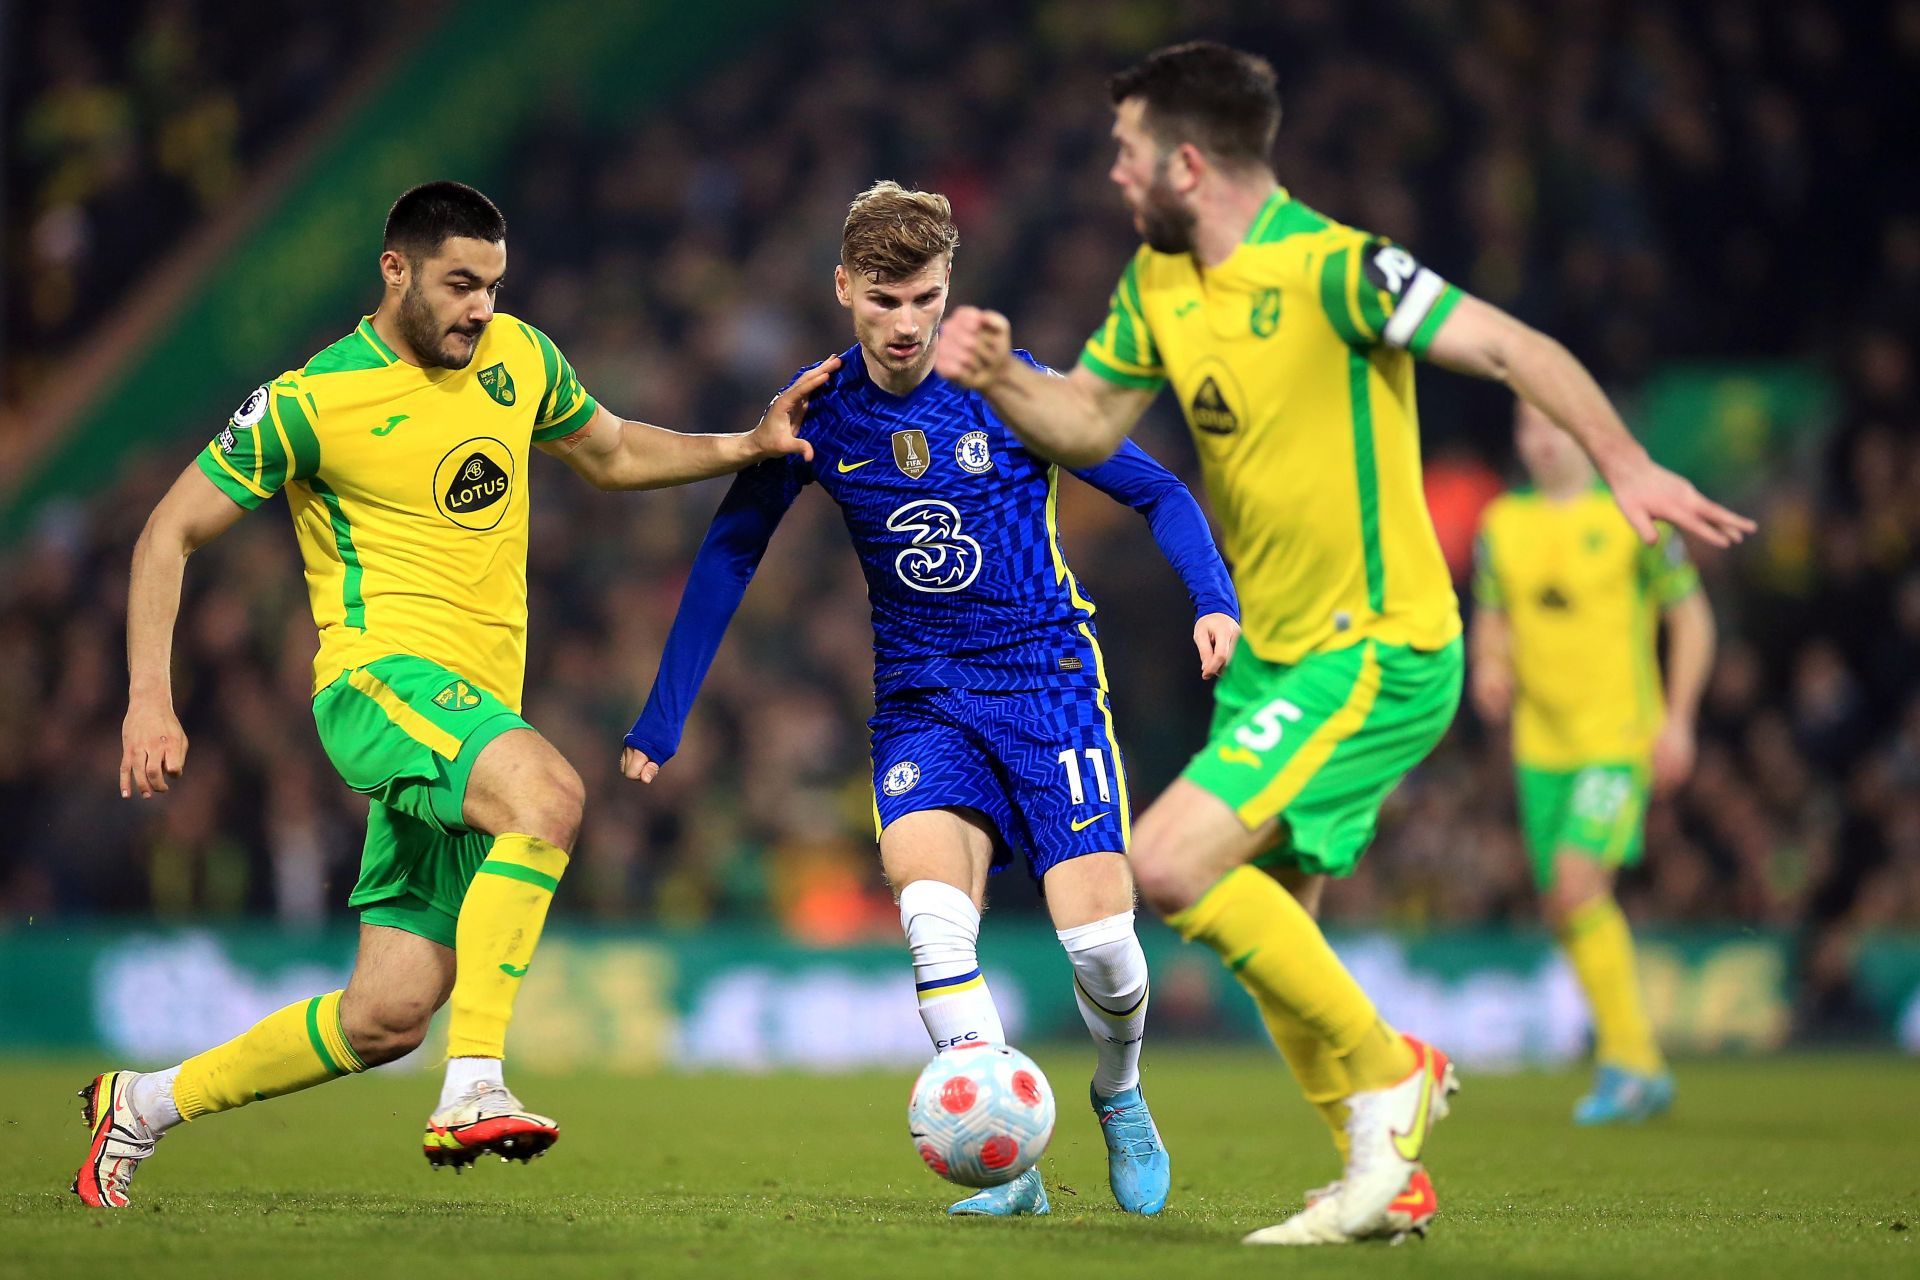 Norwich City went down to Chelsea in the Premier League without putting up an impressive show